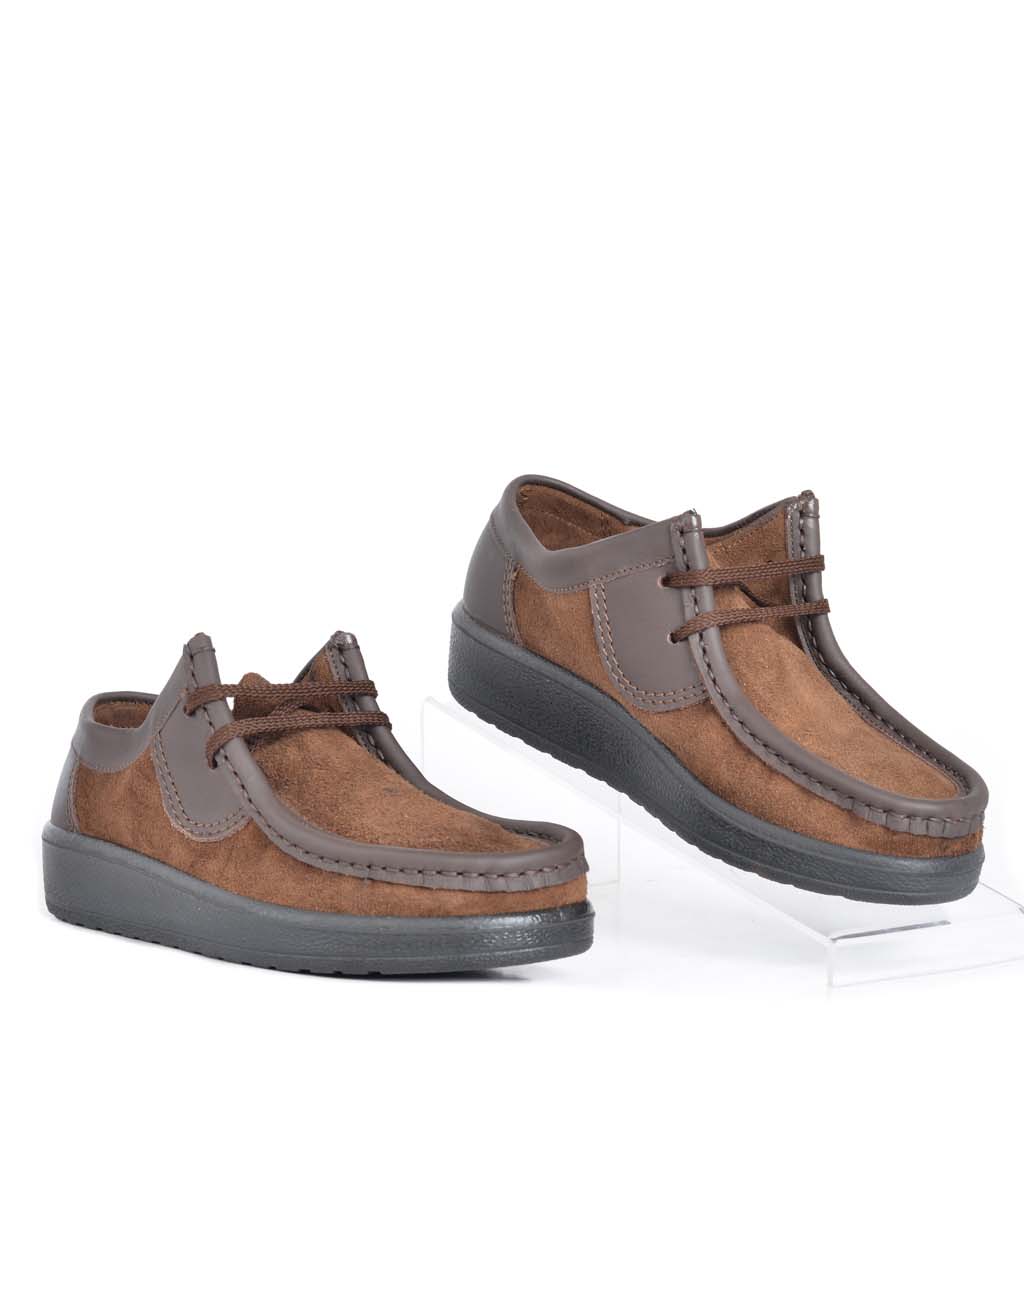 Mens Grasshoppers, Hornsby, Casual Dark Brown Moccasins – Bolton Shoes